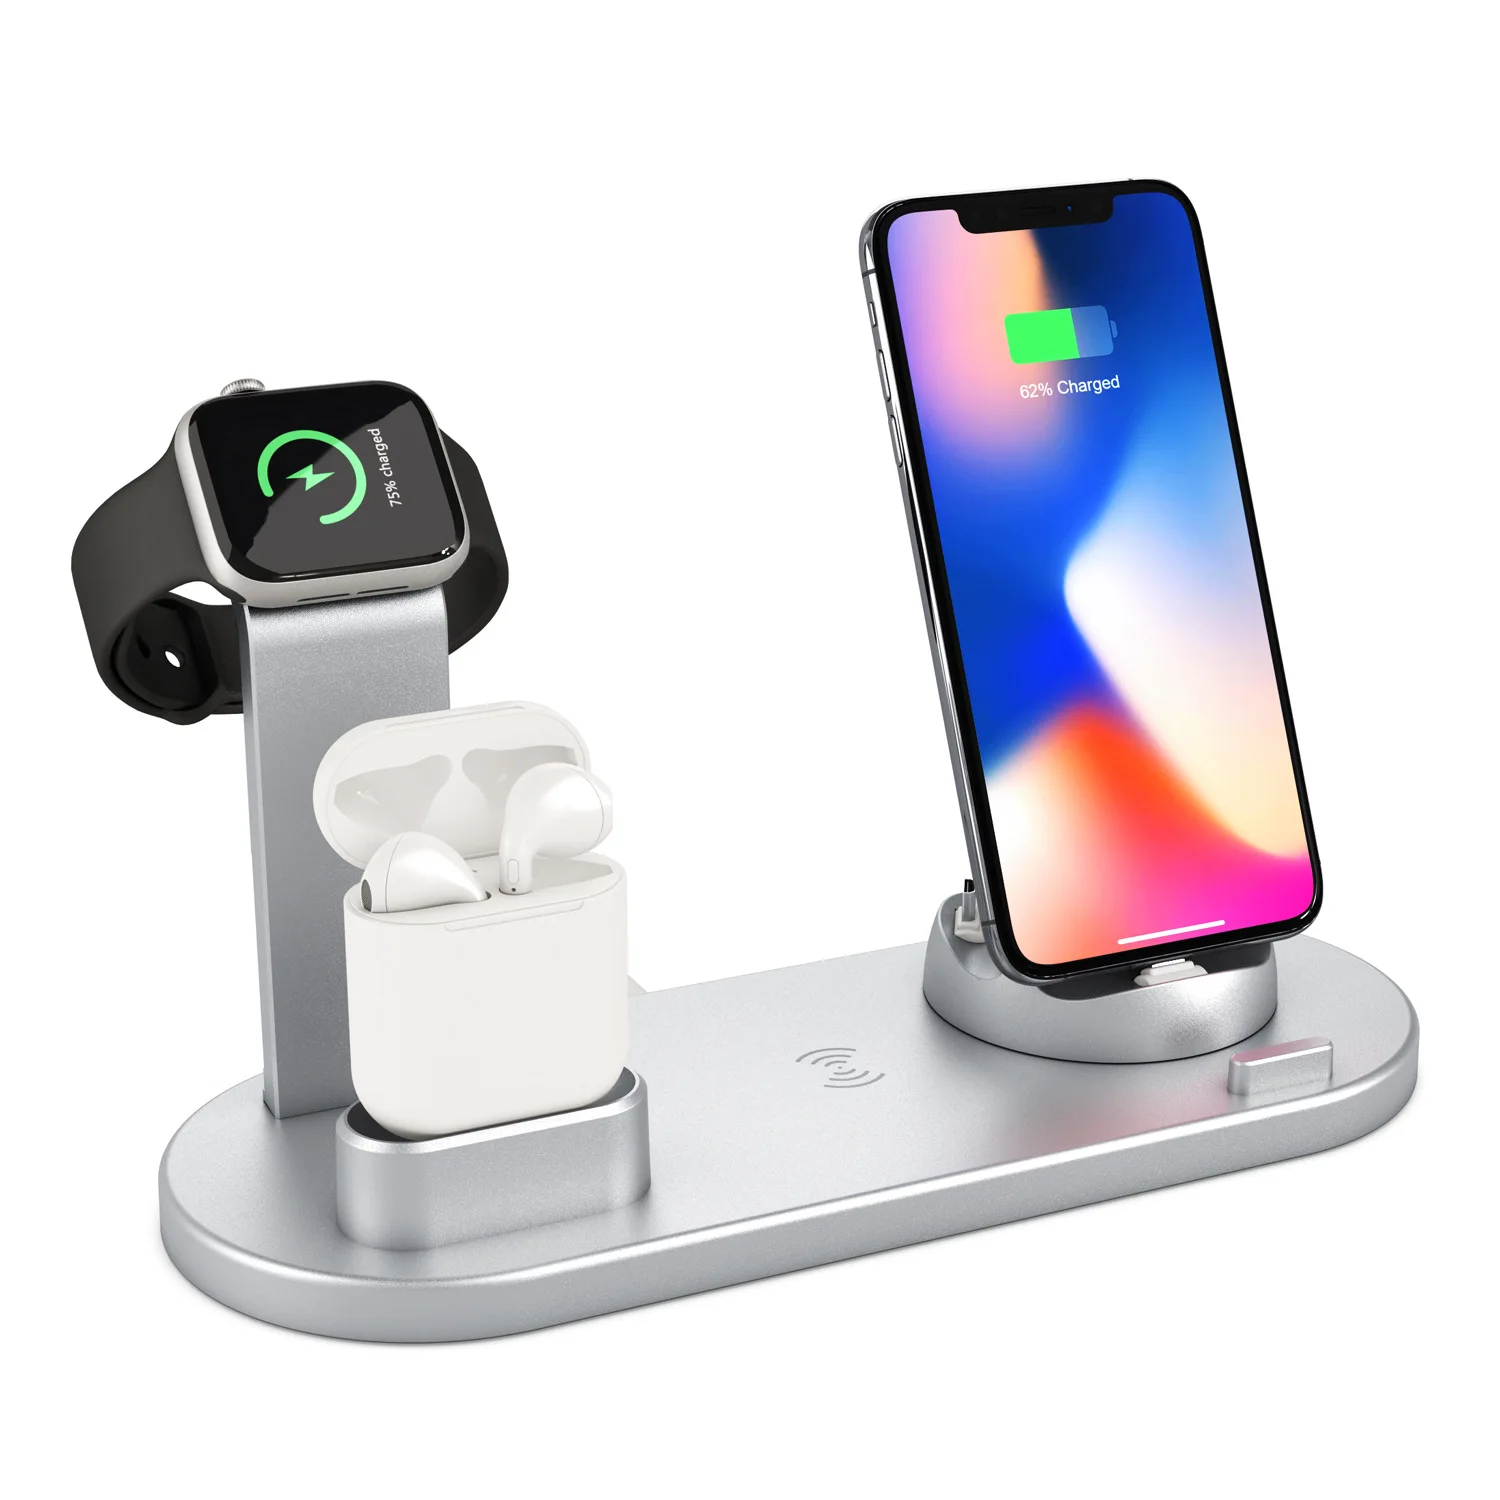 4 in1 wireless charging stand mobile phone docking station 10w suitable for iphone airpods watch samsung free global shipping